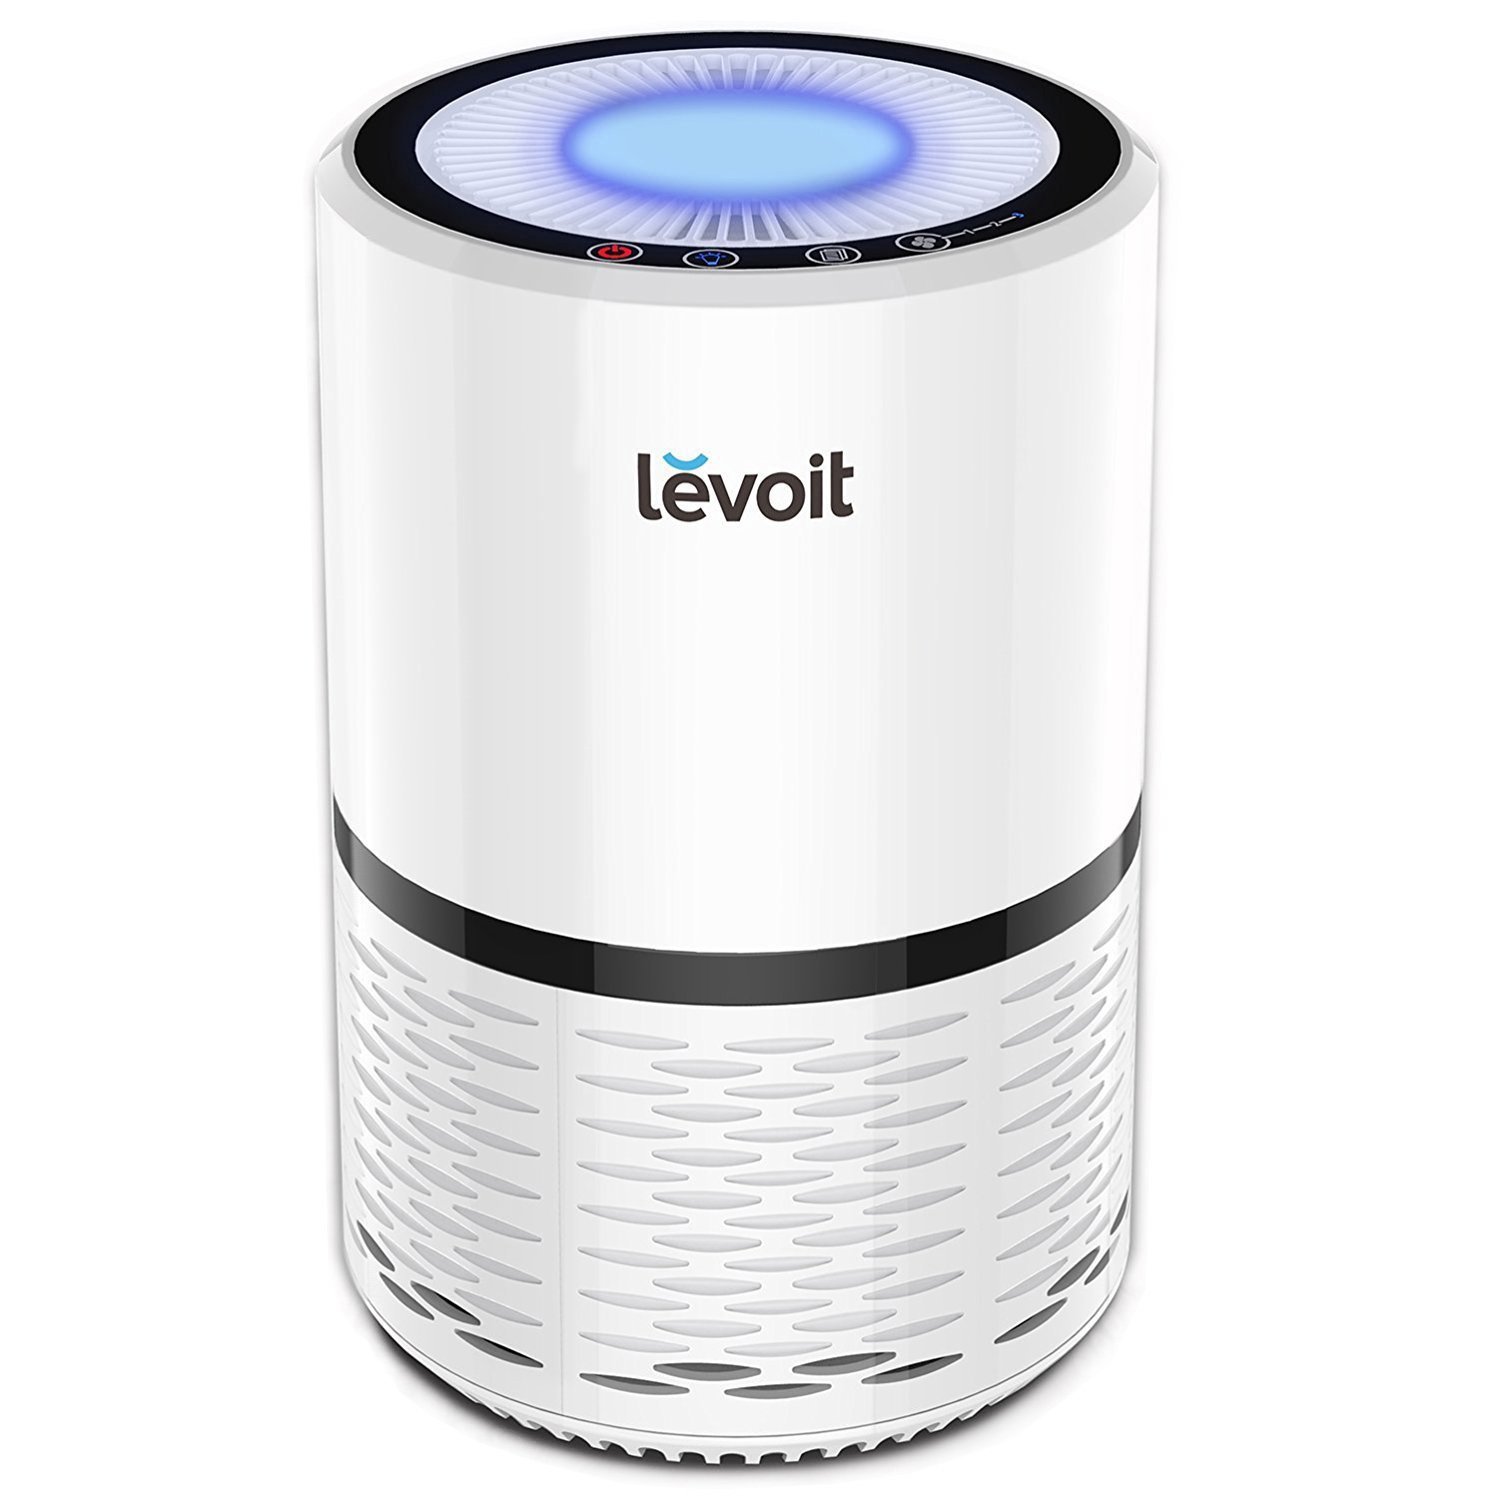 LEVOIT LV-H132 Air Purifier with Hepa Filter